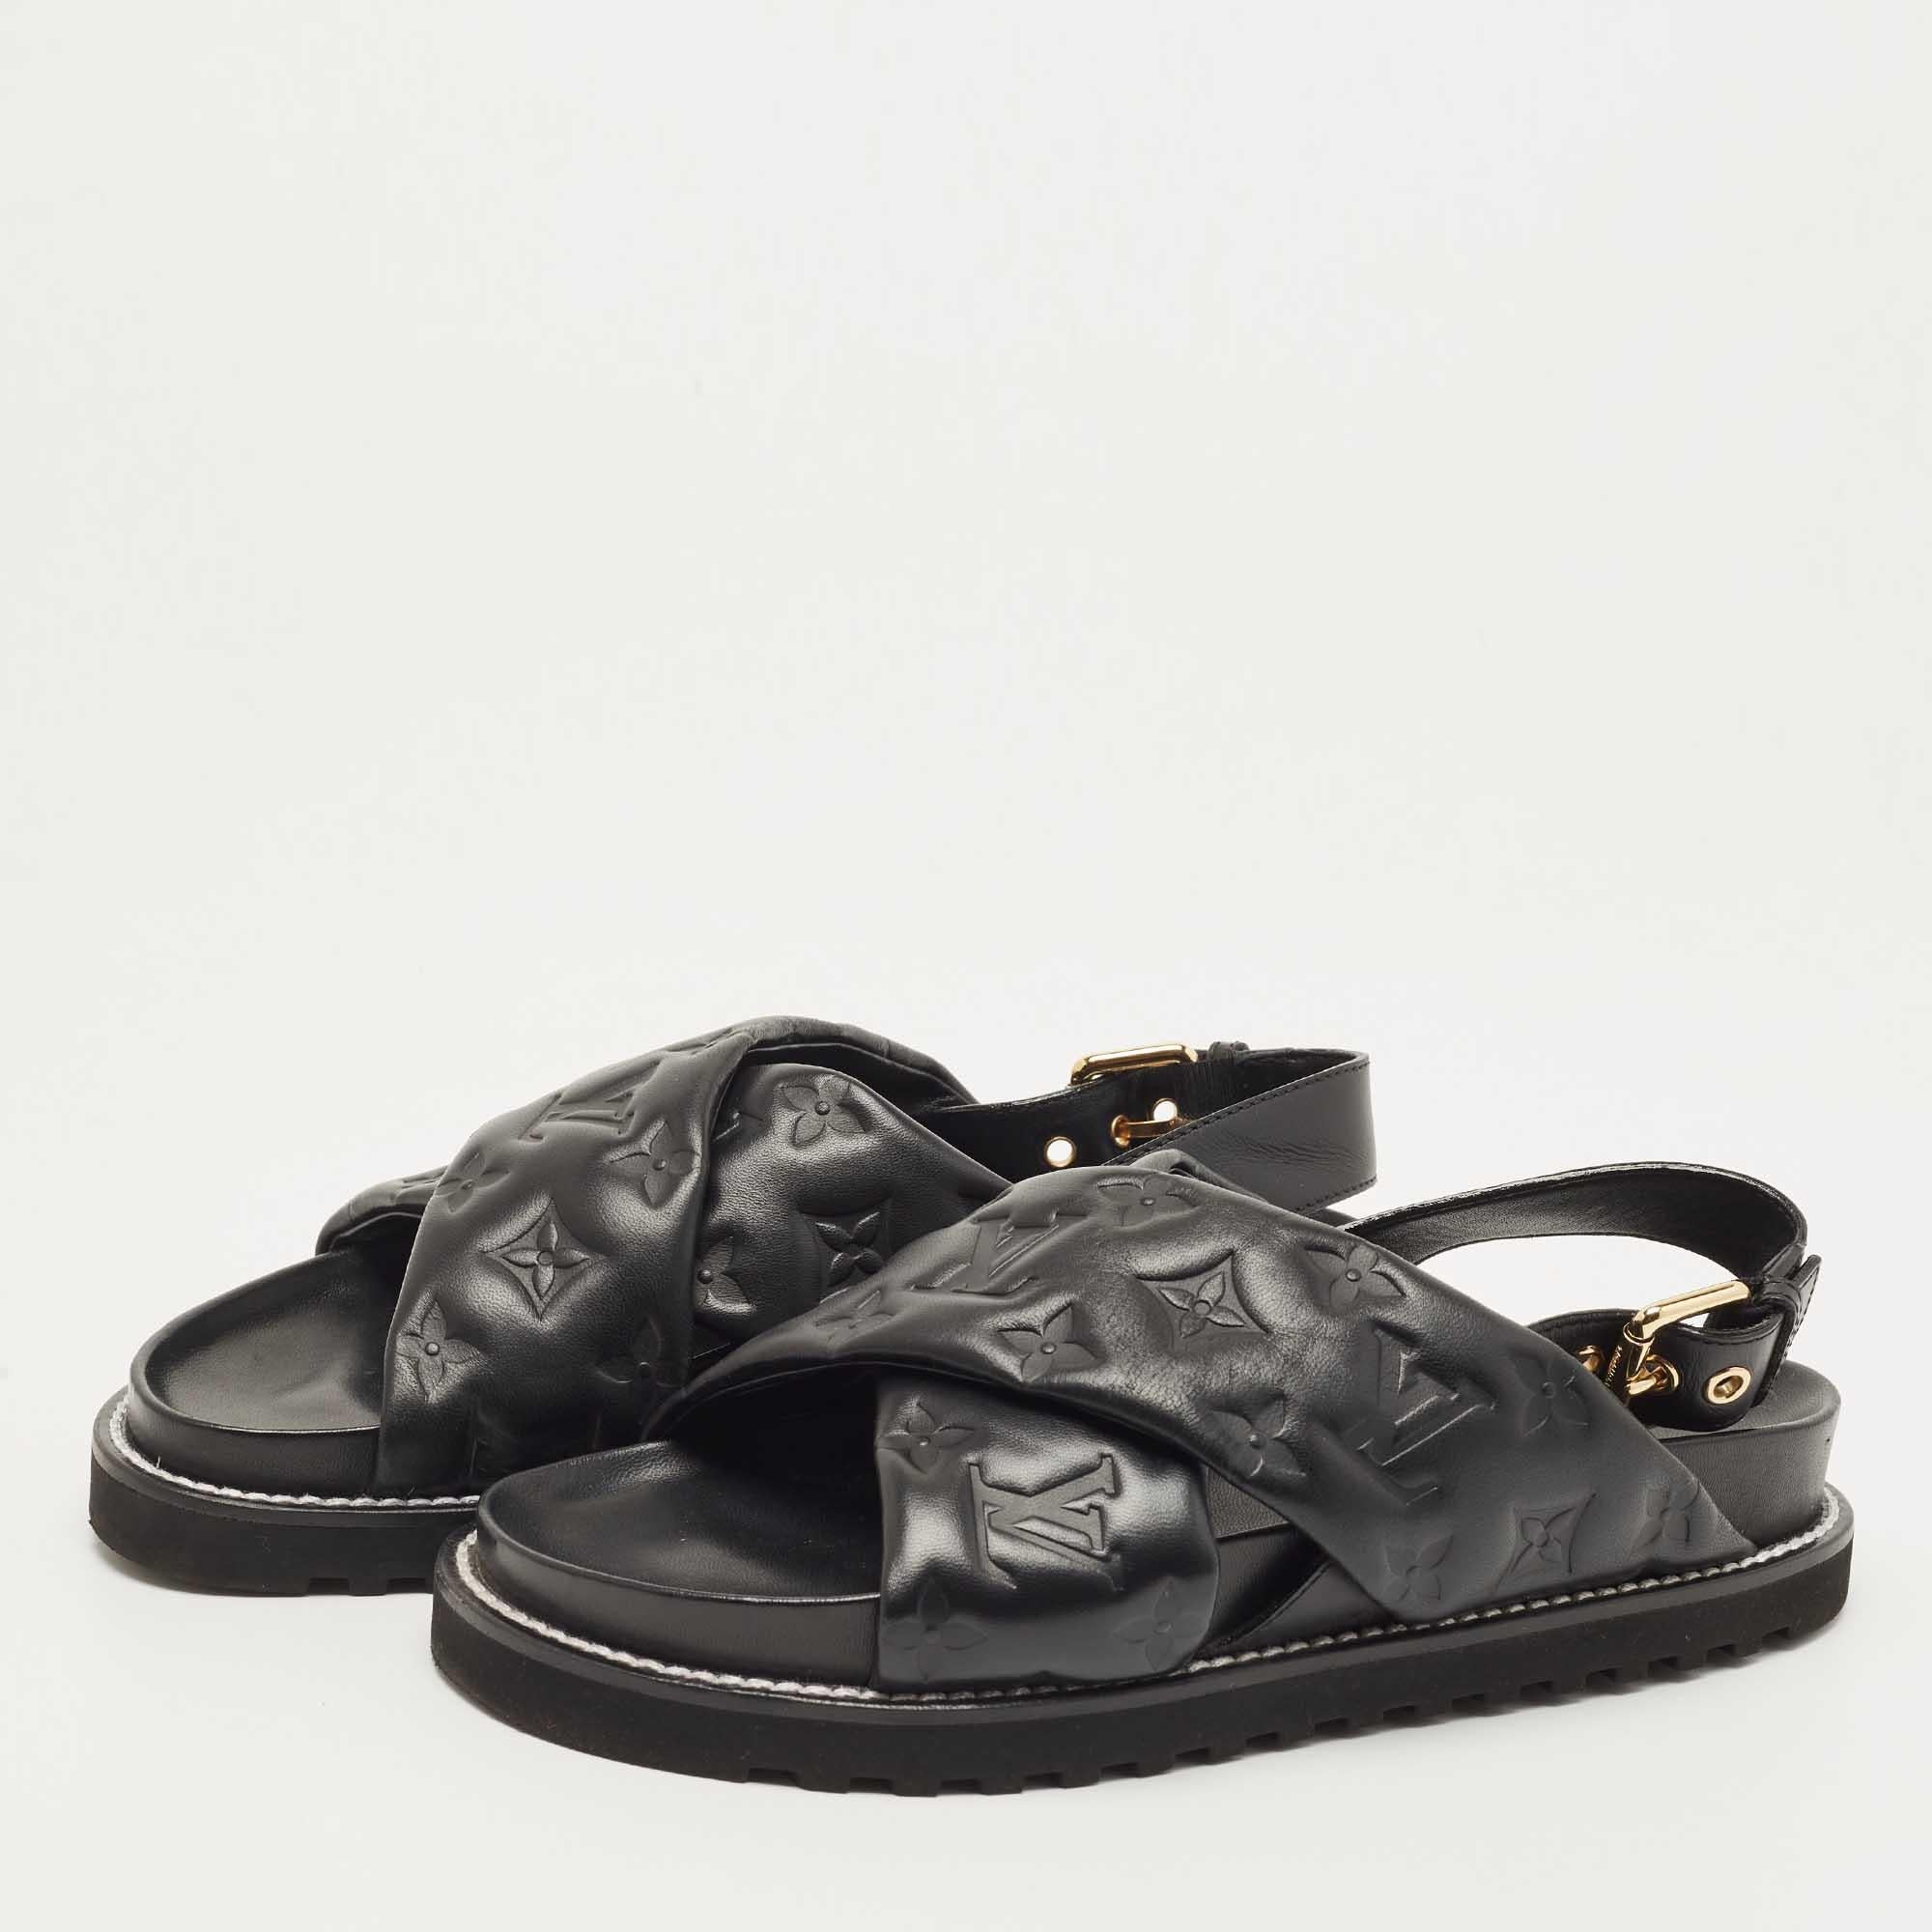 The Louis Vuitton Paseo flats are exquisite footwear, featuring the iconic LV monogram pattern embossed onto black leather. These elegant sandals offer comfort and style with a flat sole and a sleek, minimalist design, making them a luxurious